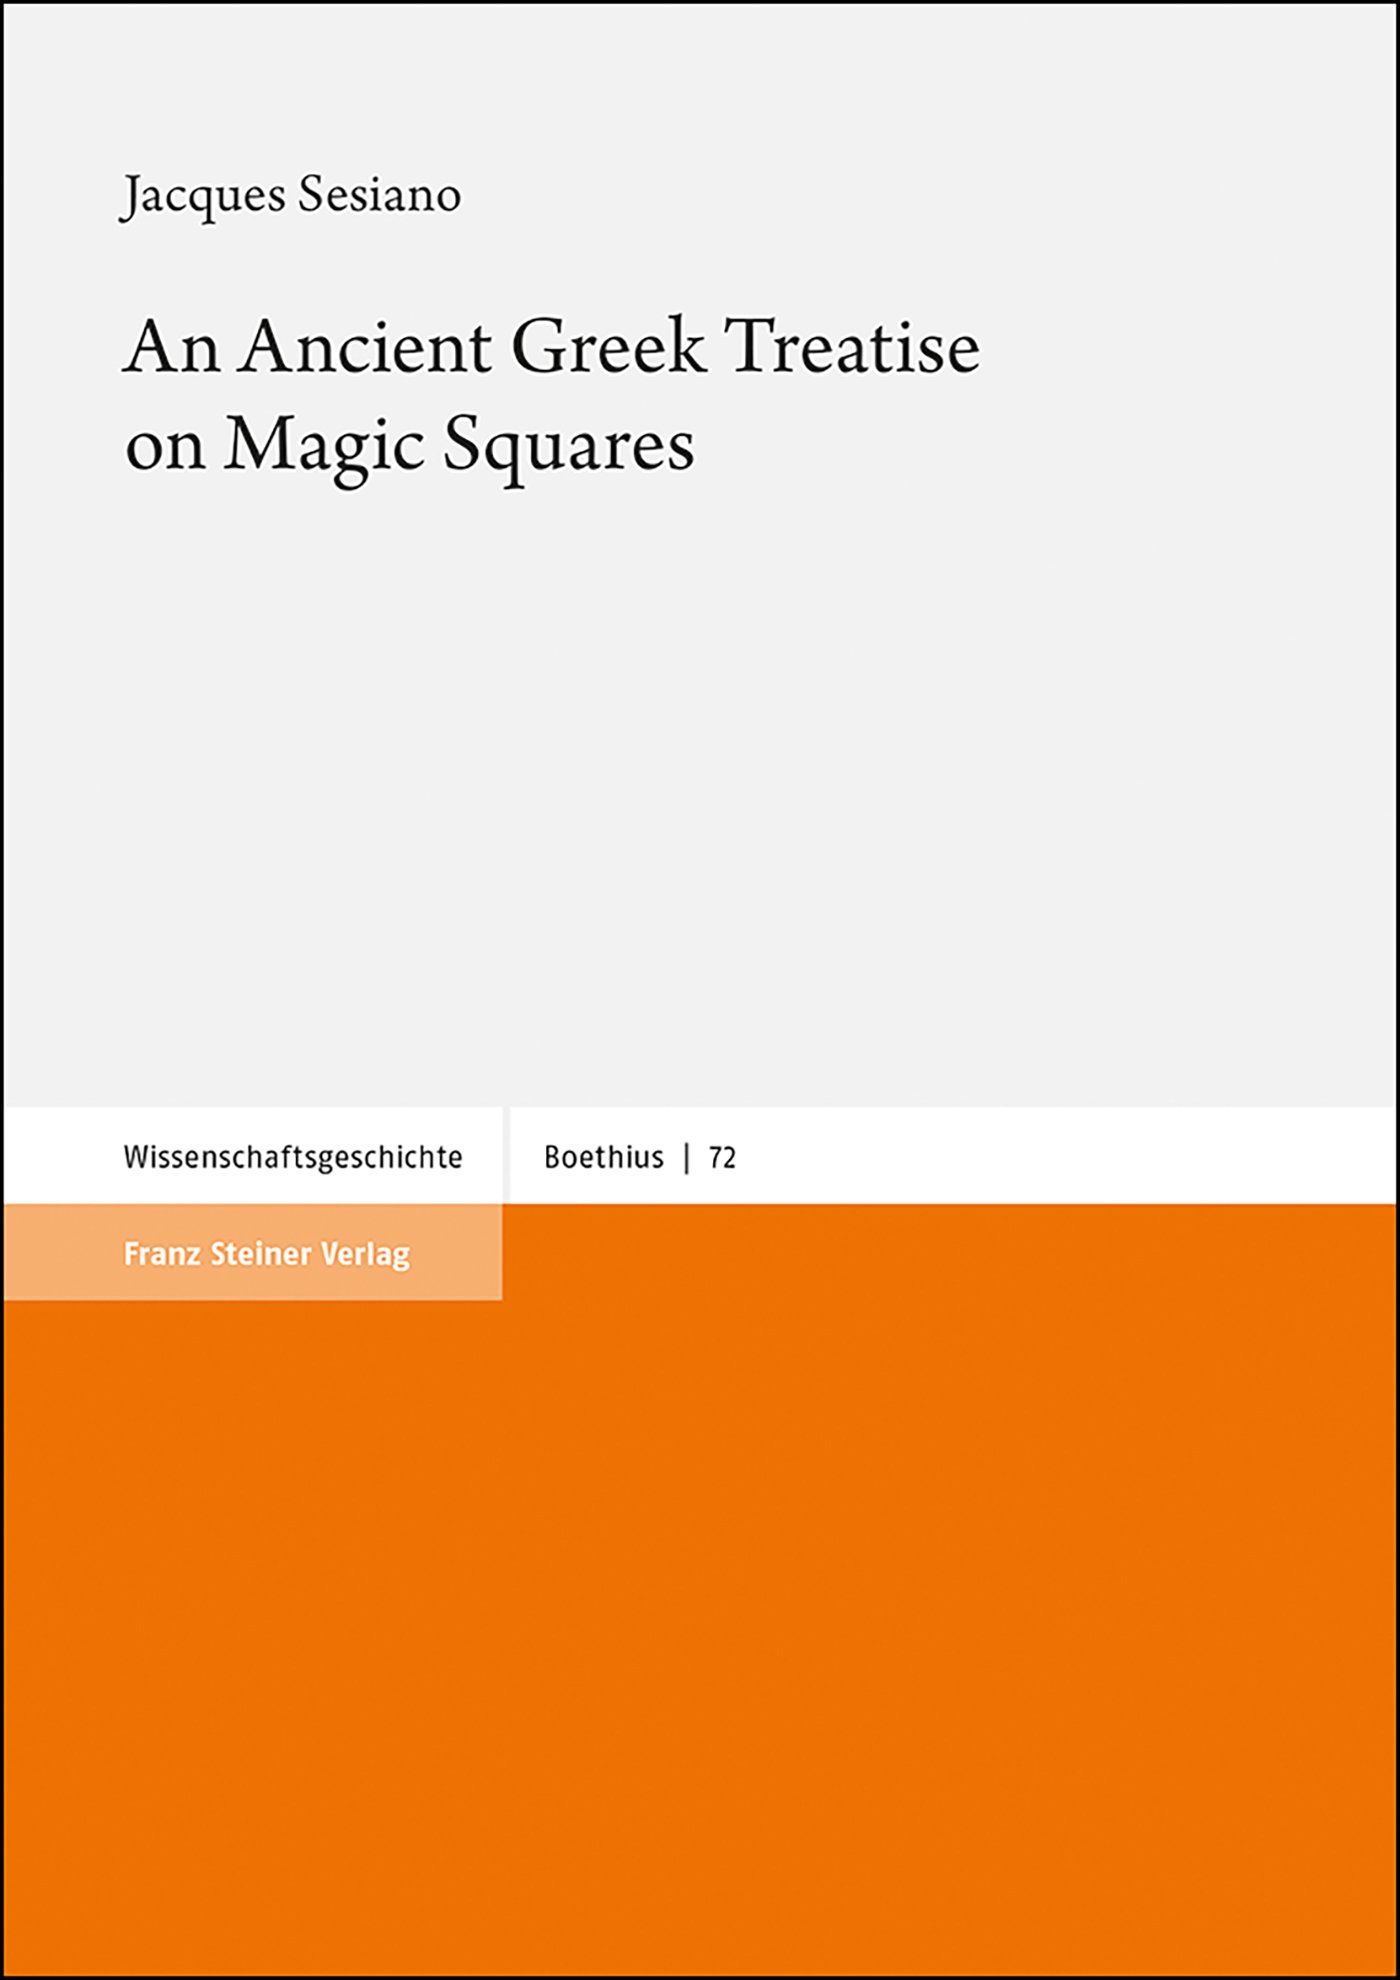 An Ancient Greek Treatise on Magic Squares